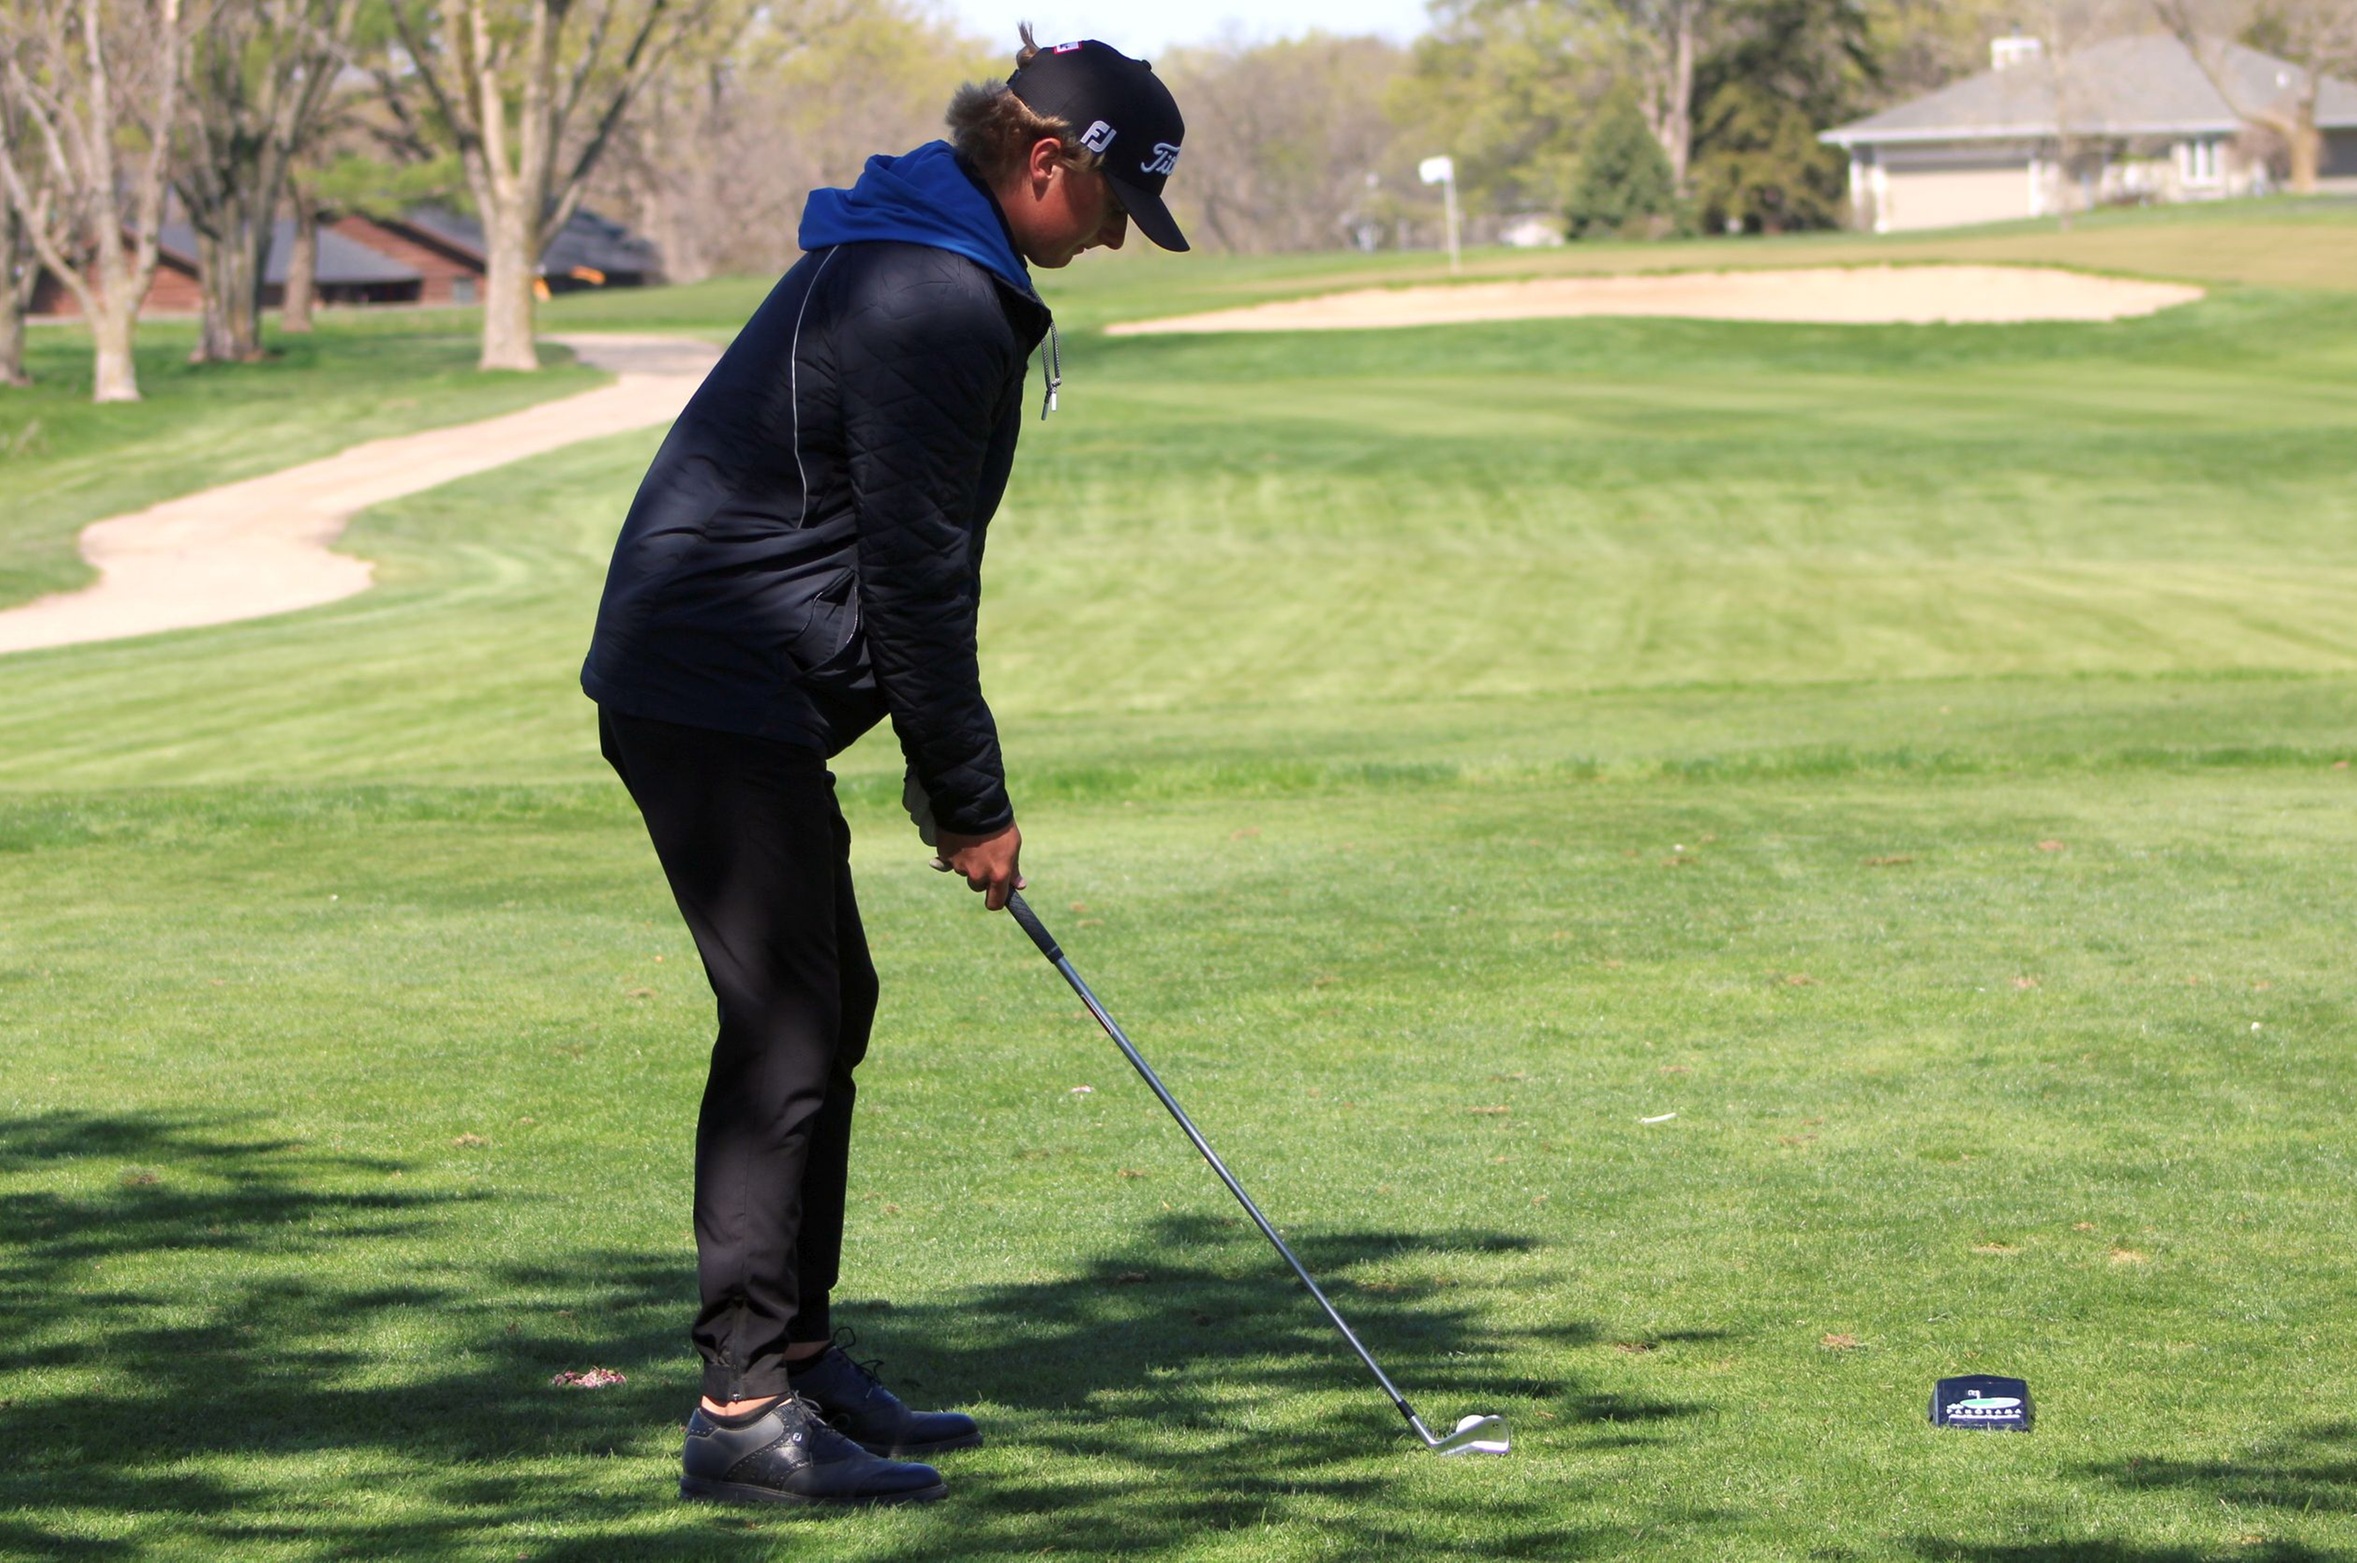 Freshman Tim Castle led the NIACC men's golf team Tuesday with an 82 during the third round of the NJCAA North Central District Championships.